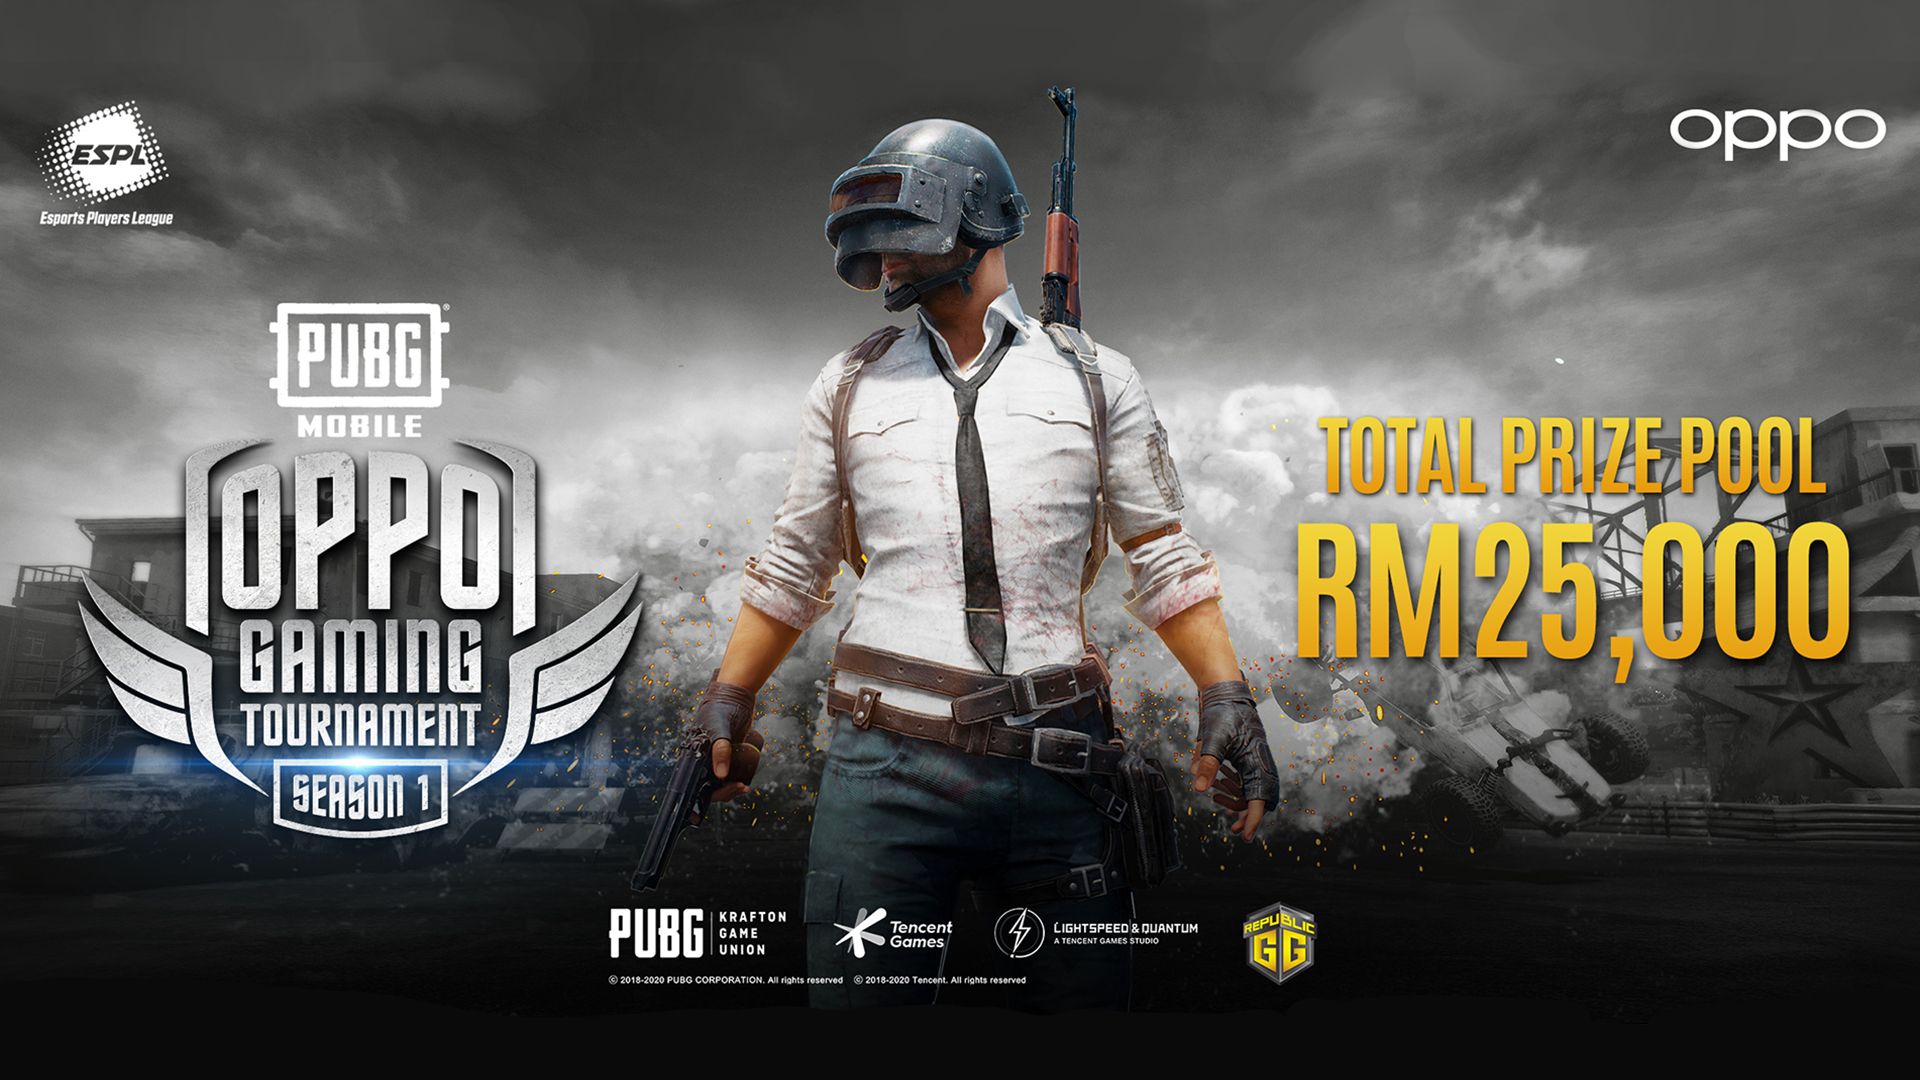 Oppo Launches PUBG eSports Tournament with ESPL and Digi with prizes worth up to RM000